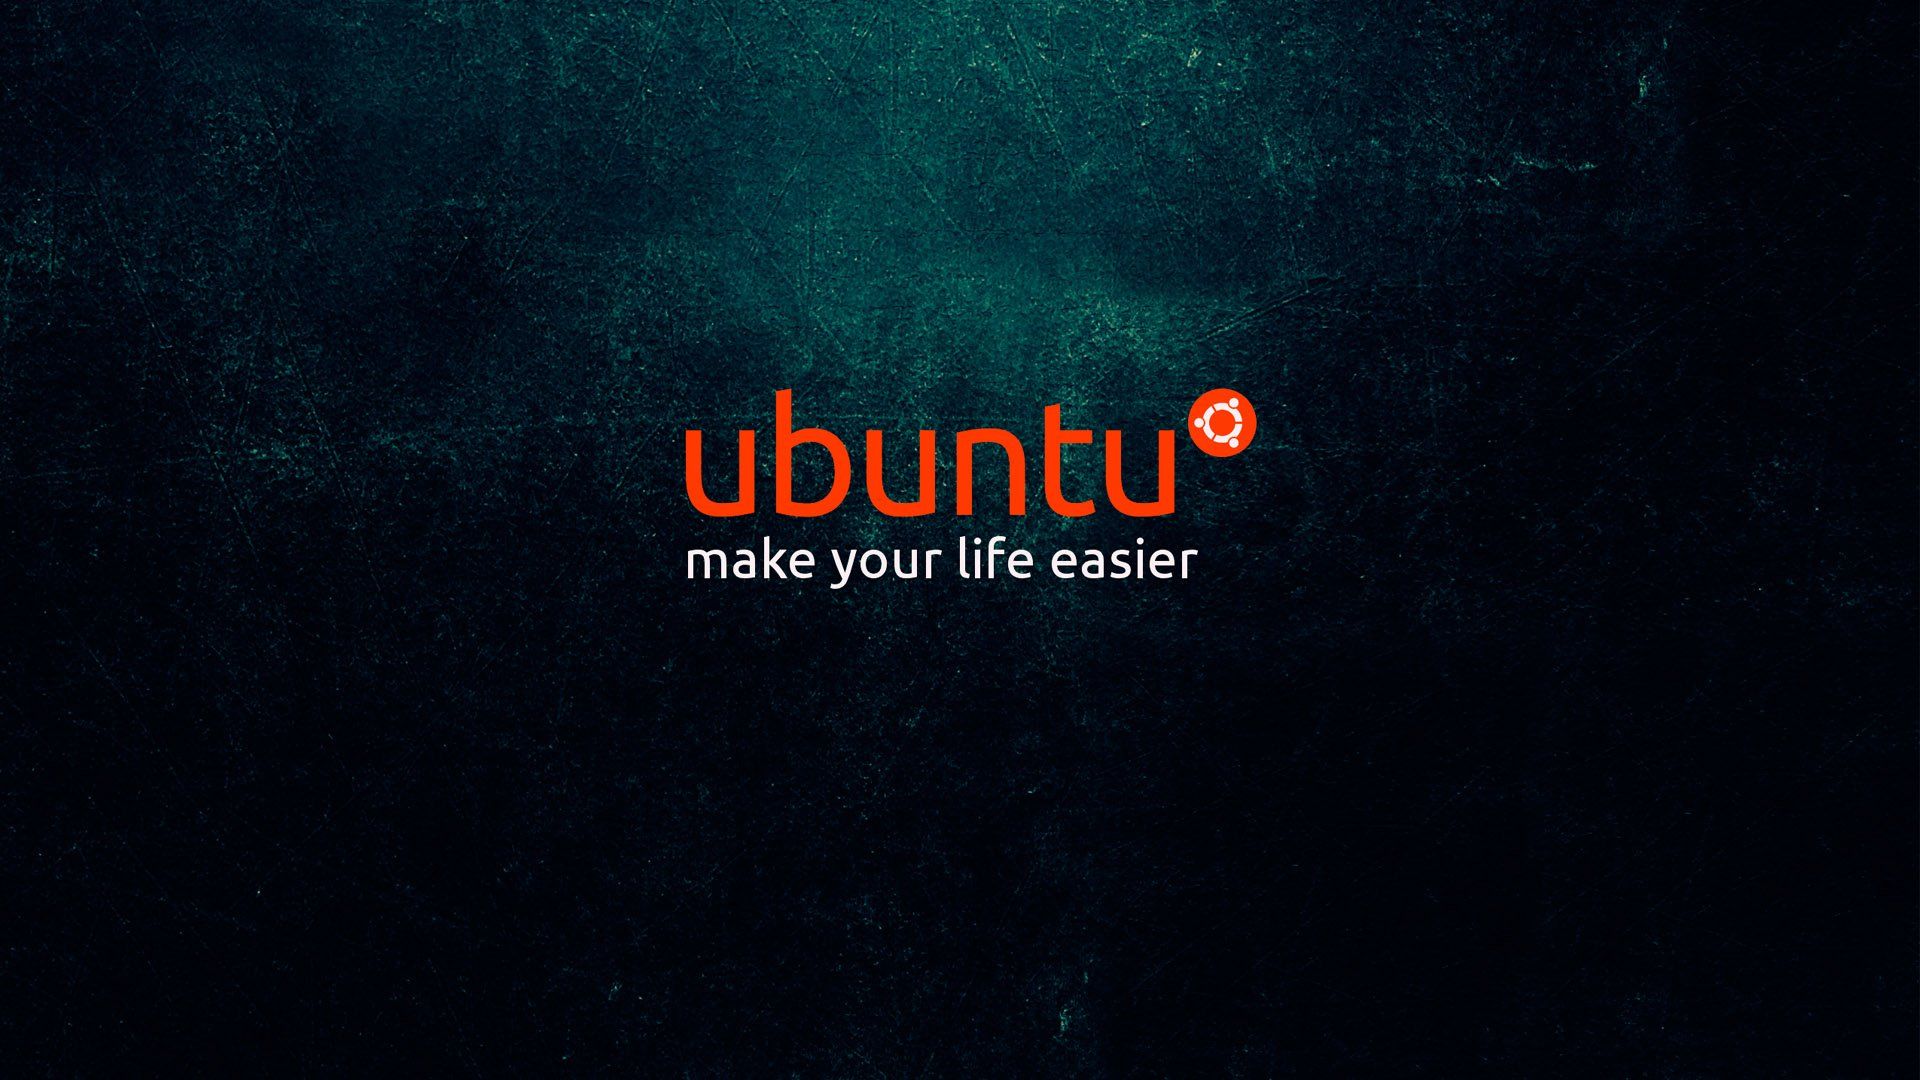 Linux Stylishly And Simple - HD Wallpapers Widescreen - 1920x1080